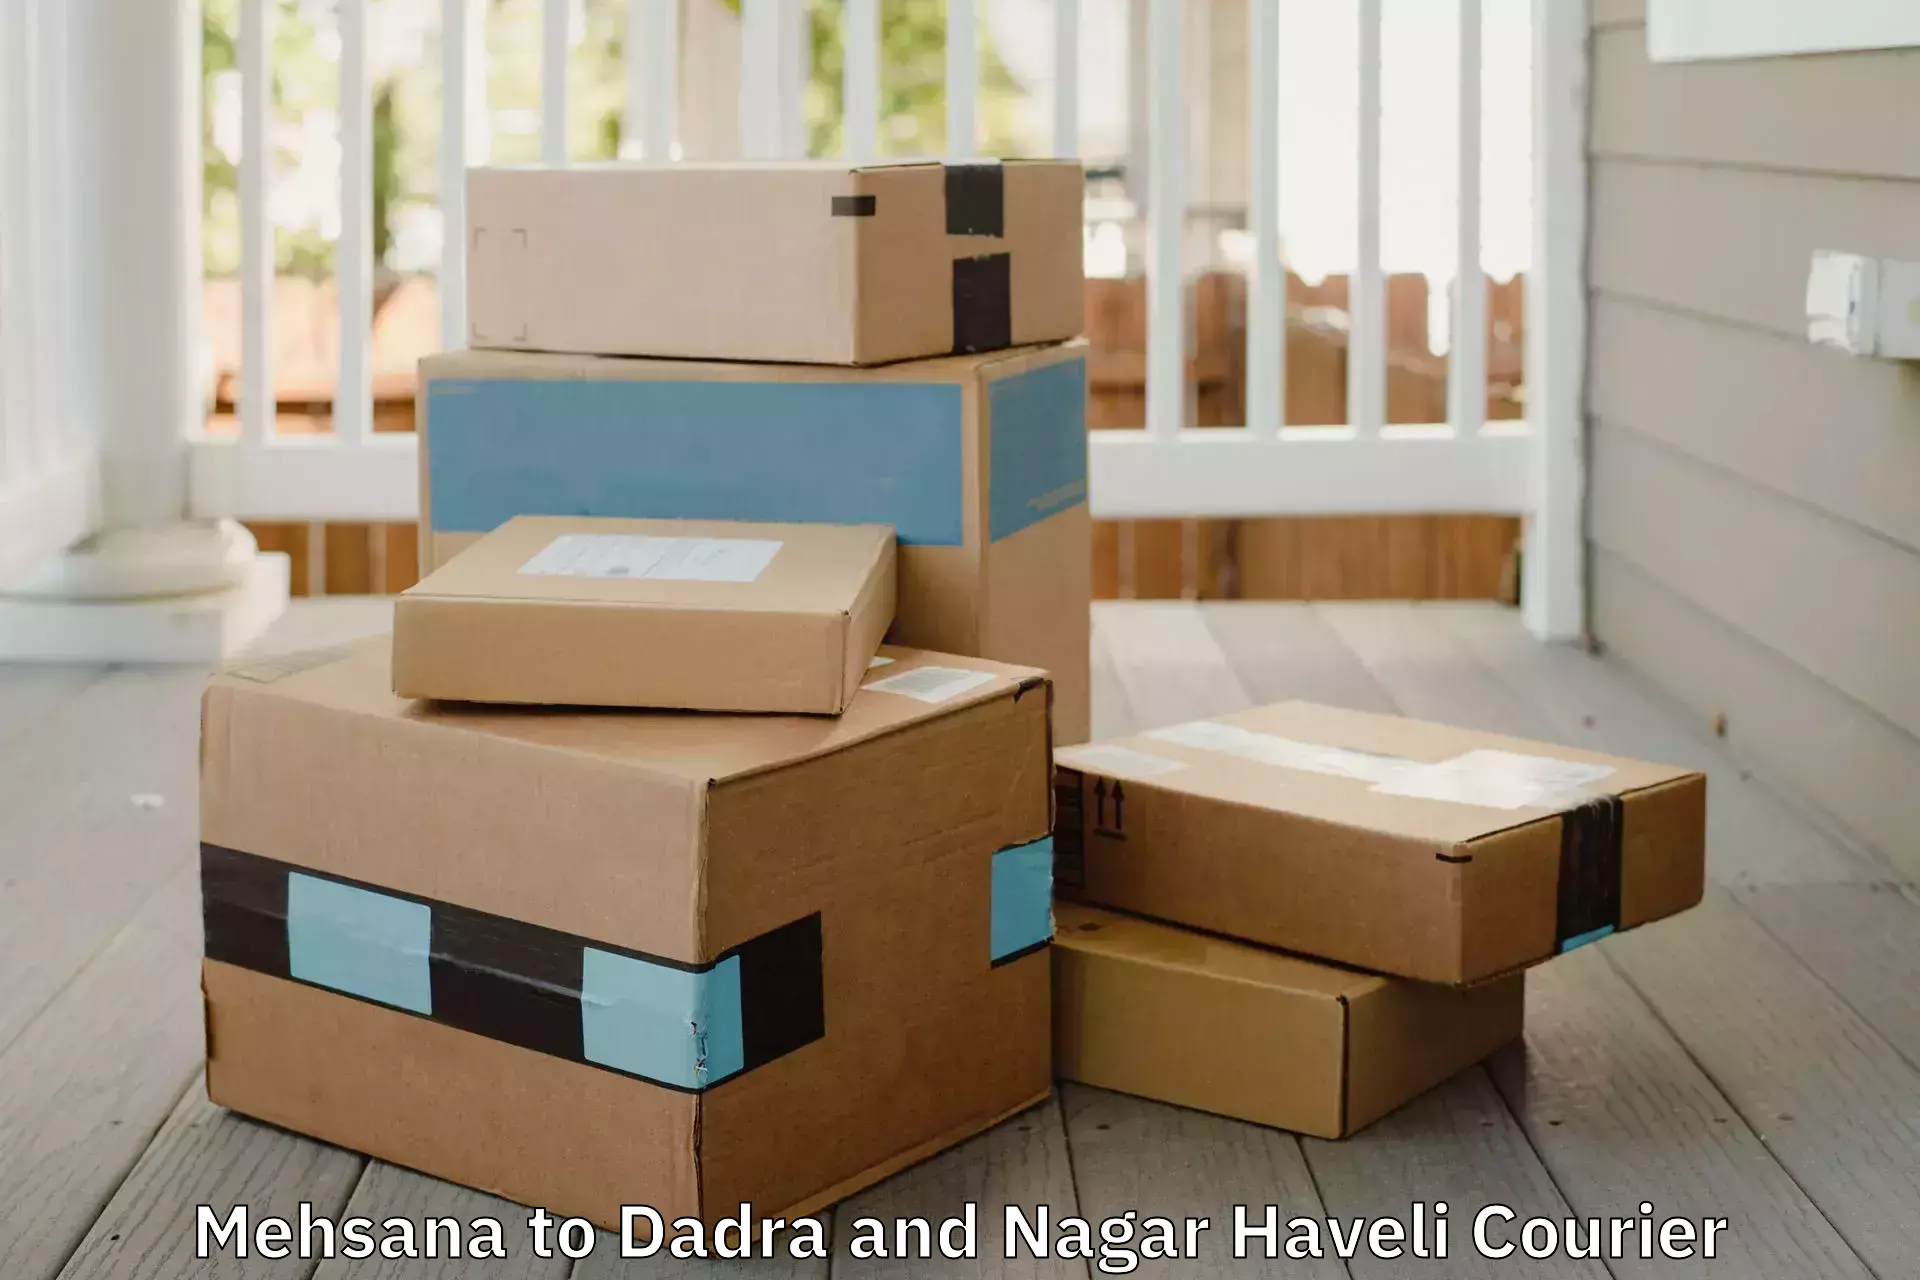 Moving and packing experts Mehsana to Dadra and Nagar Haveli